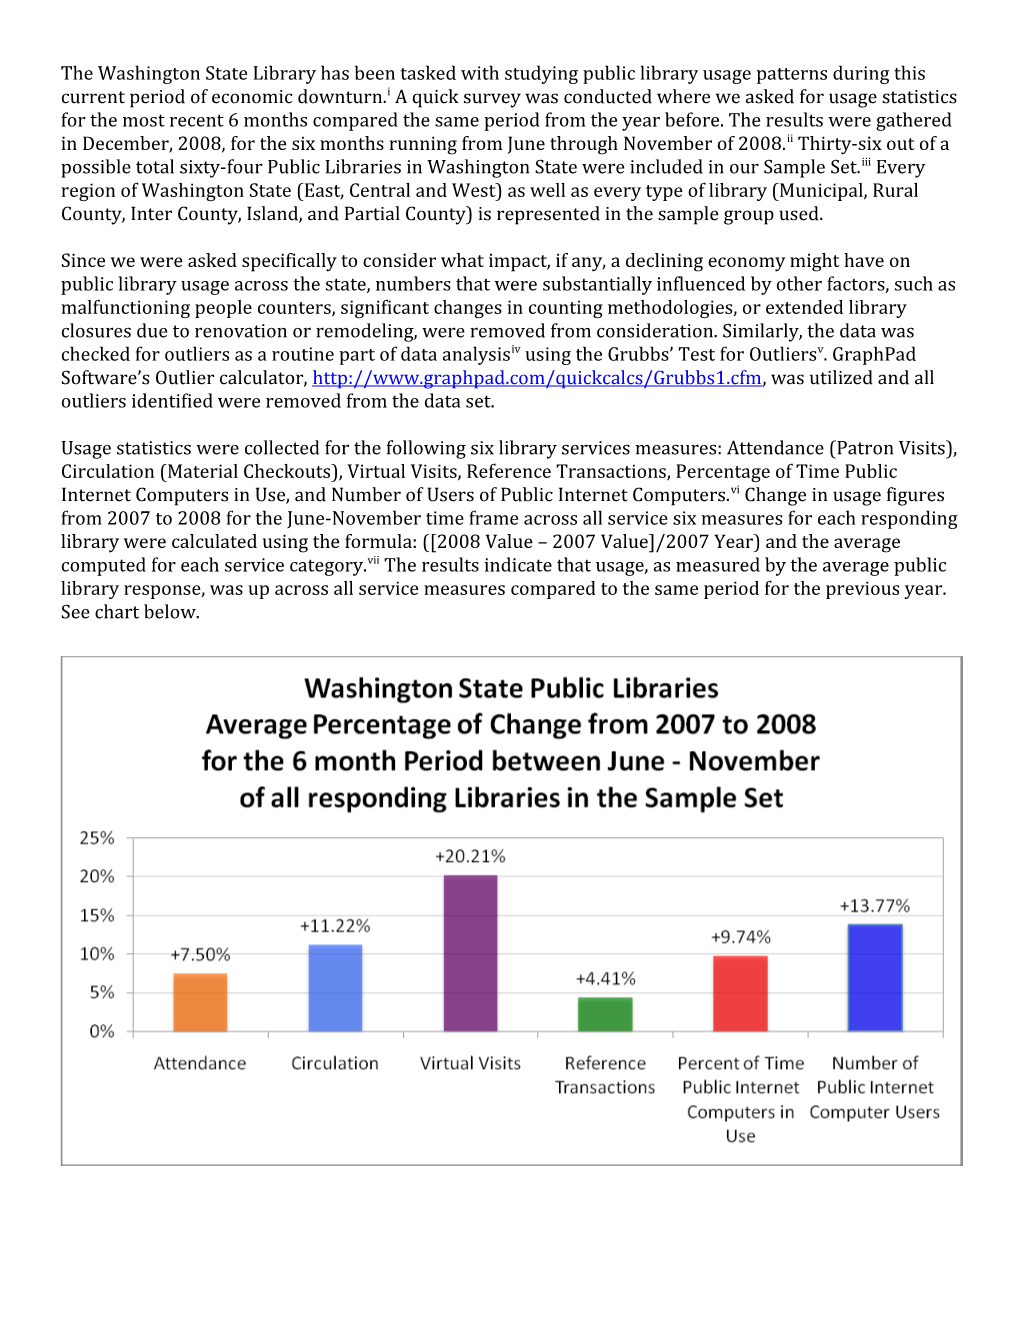 The Washington State Library Has Been Tasked with Studying Public Library Usage Patterns